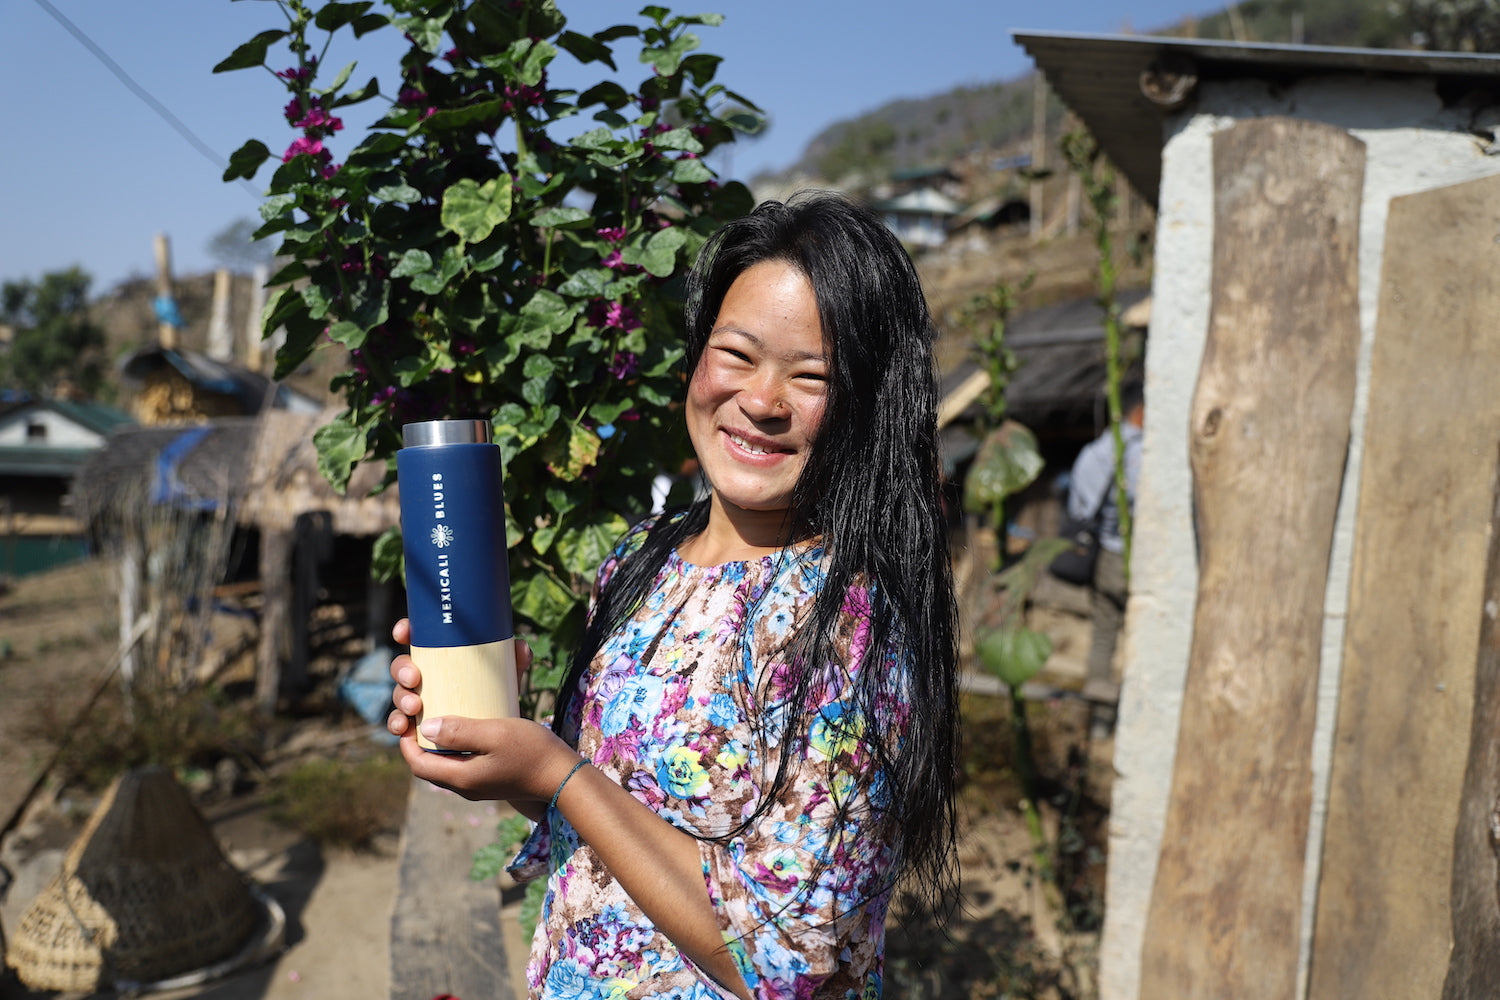 Smiling indigenous Nepalese woman high in the mountains with a Mexicali Blues water bottle recently filled by the new safe water drinking system installed in Bokchamsido, Nepal